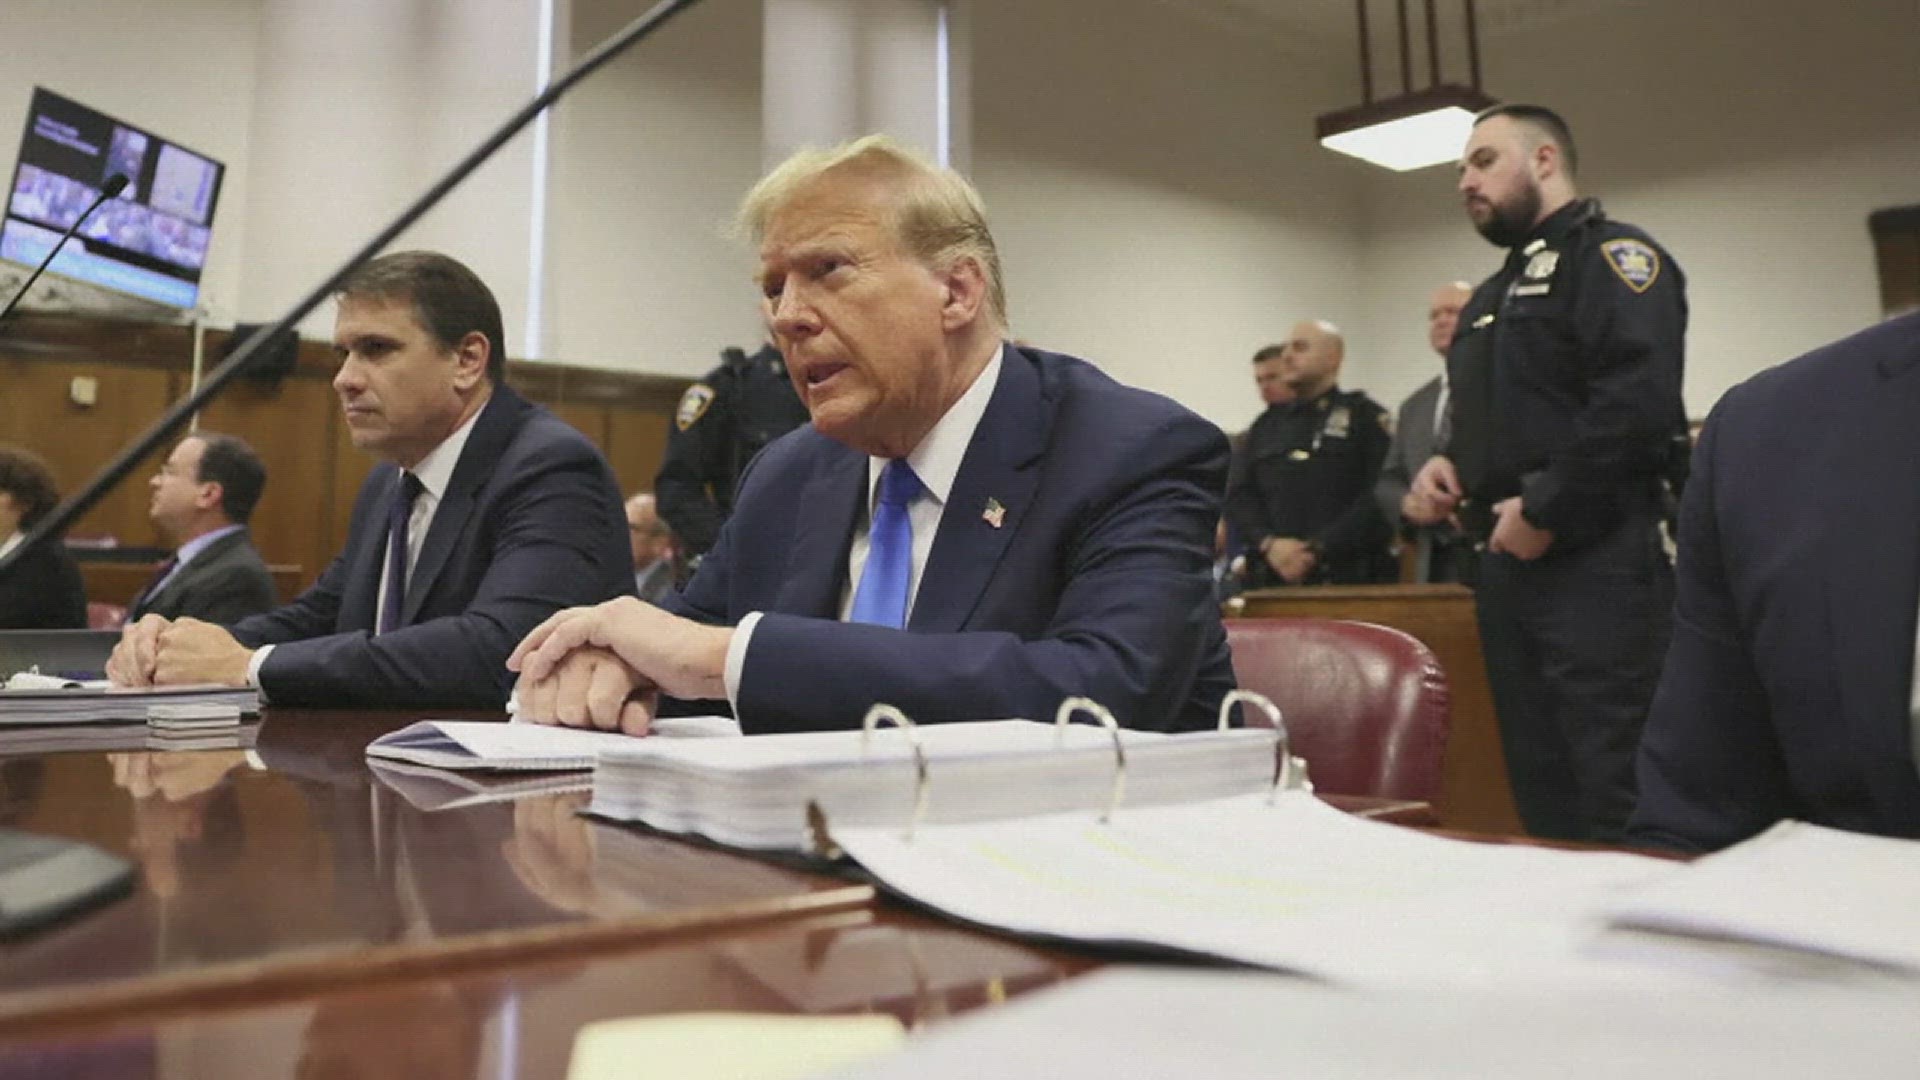 After going through numerous candidates, the 12-person jury, consisting of seven men and five women, is now set for Trump's hush money criminal trial.